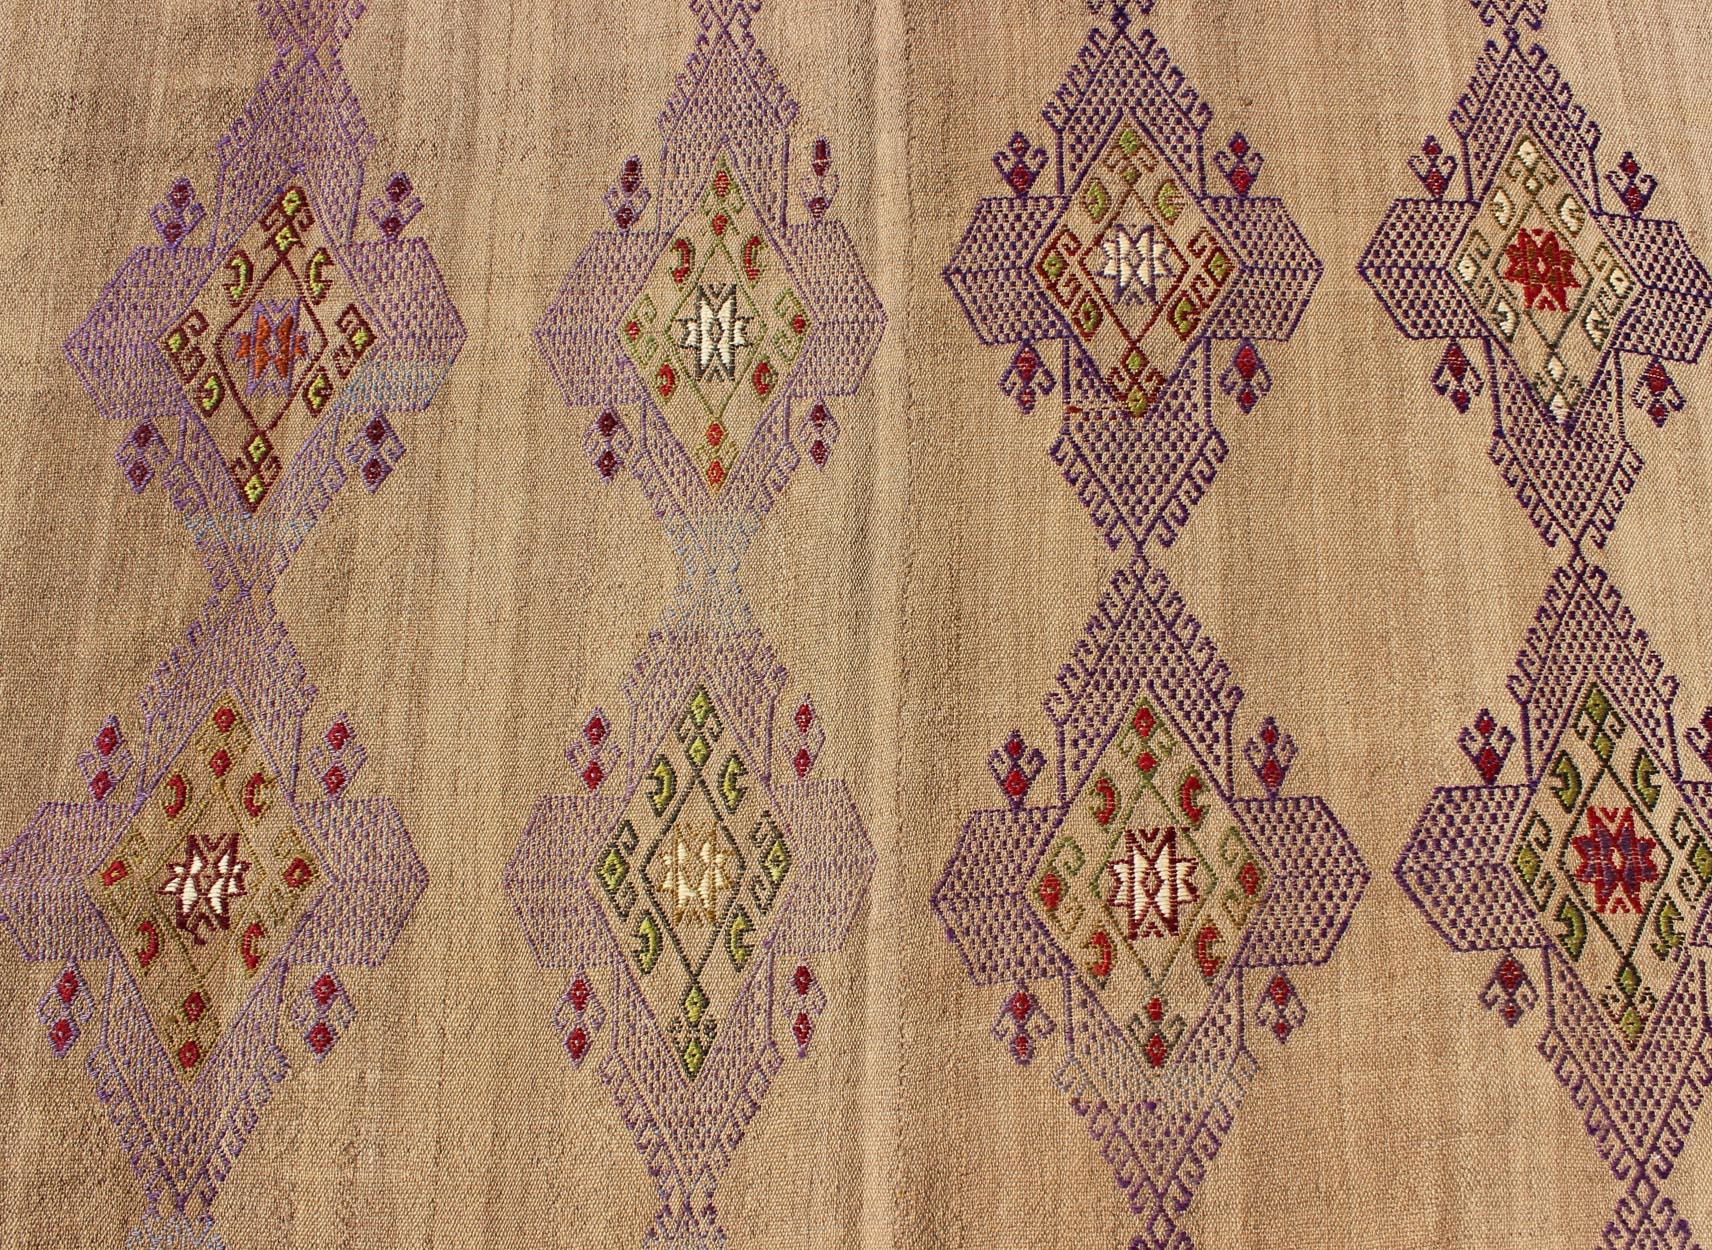 Hand-Woven Turkish Kilim Hand Woven Embroidered Purple Diamonds on a Tan Background For Sale